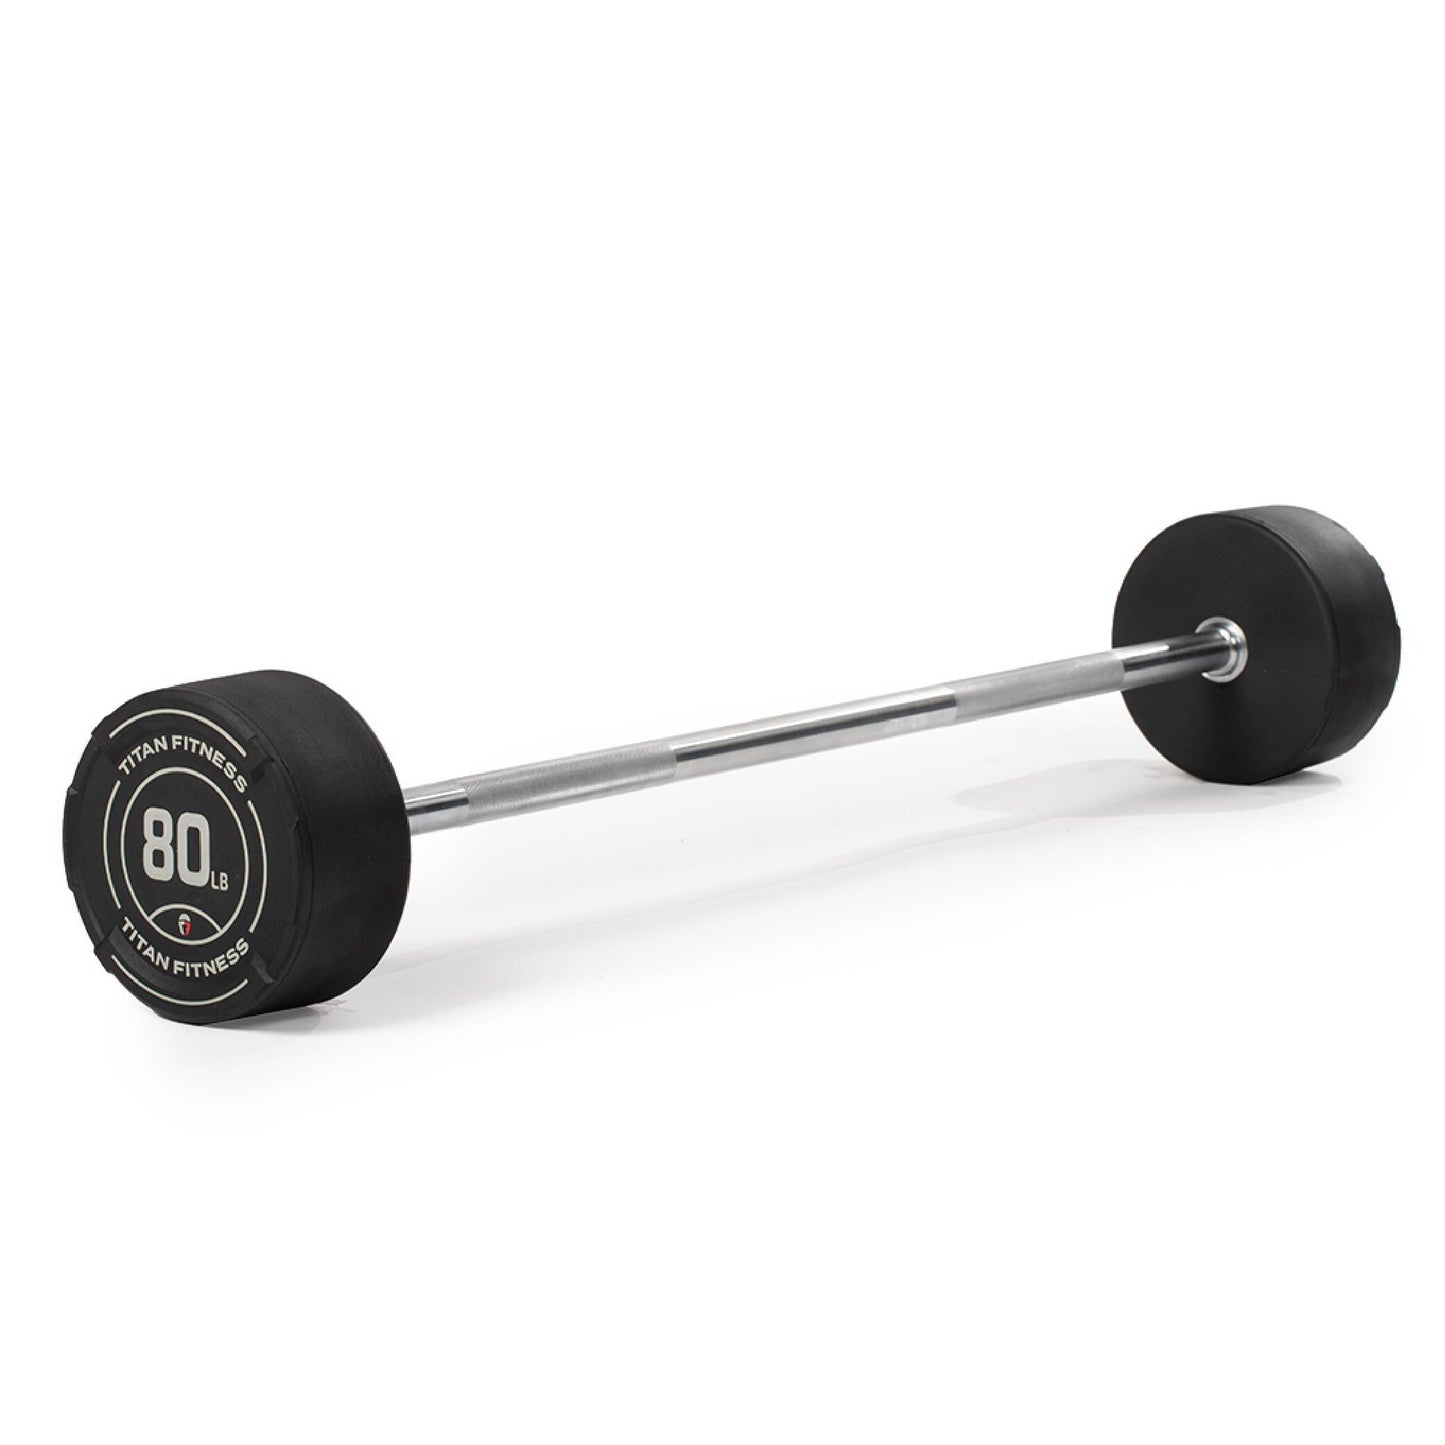 80 LB Straight Fixed Rubber Barbell - view 1